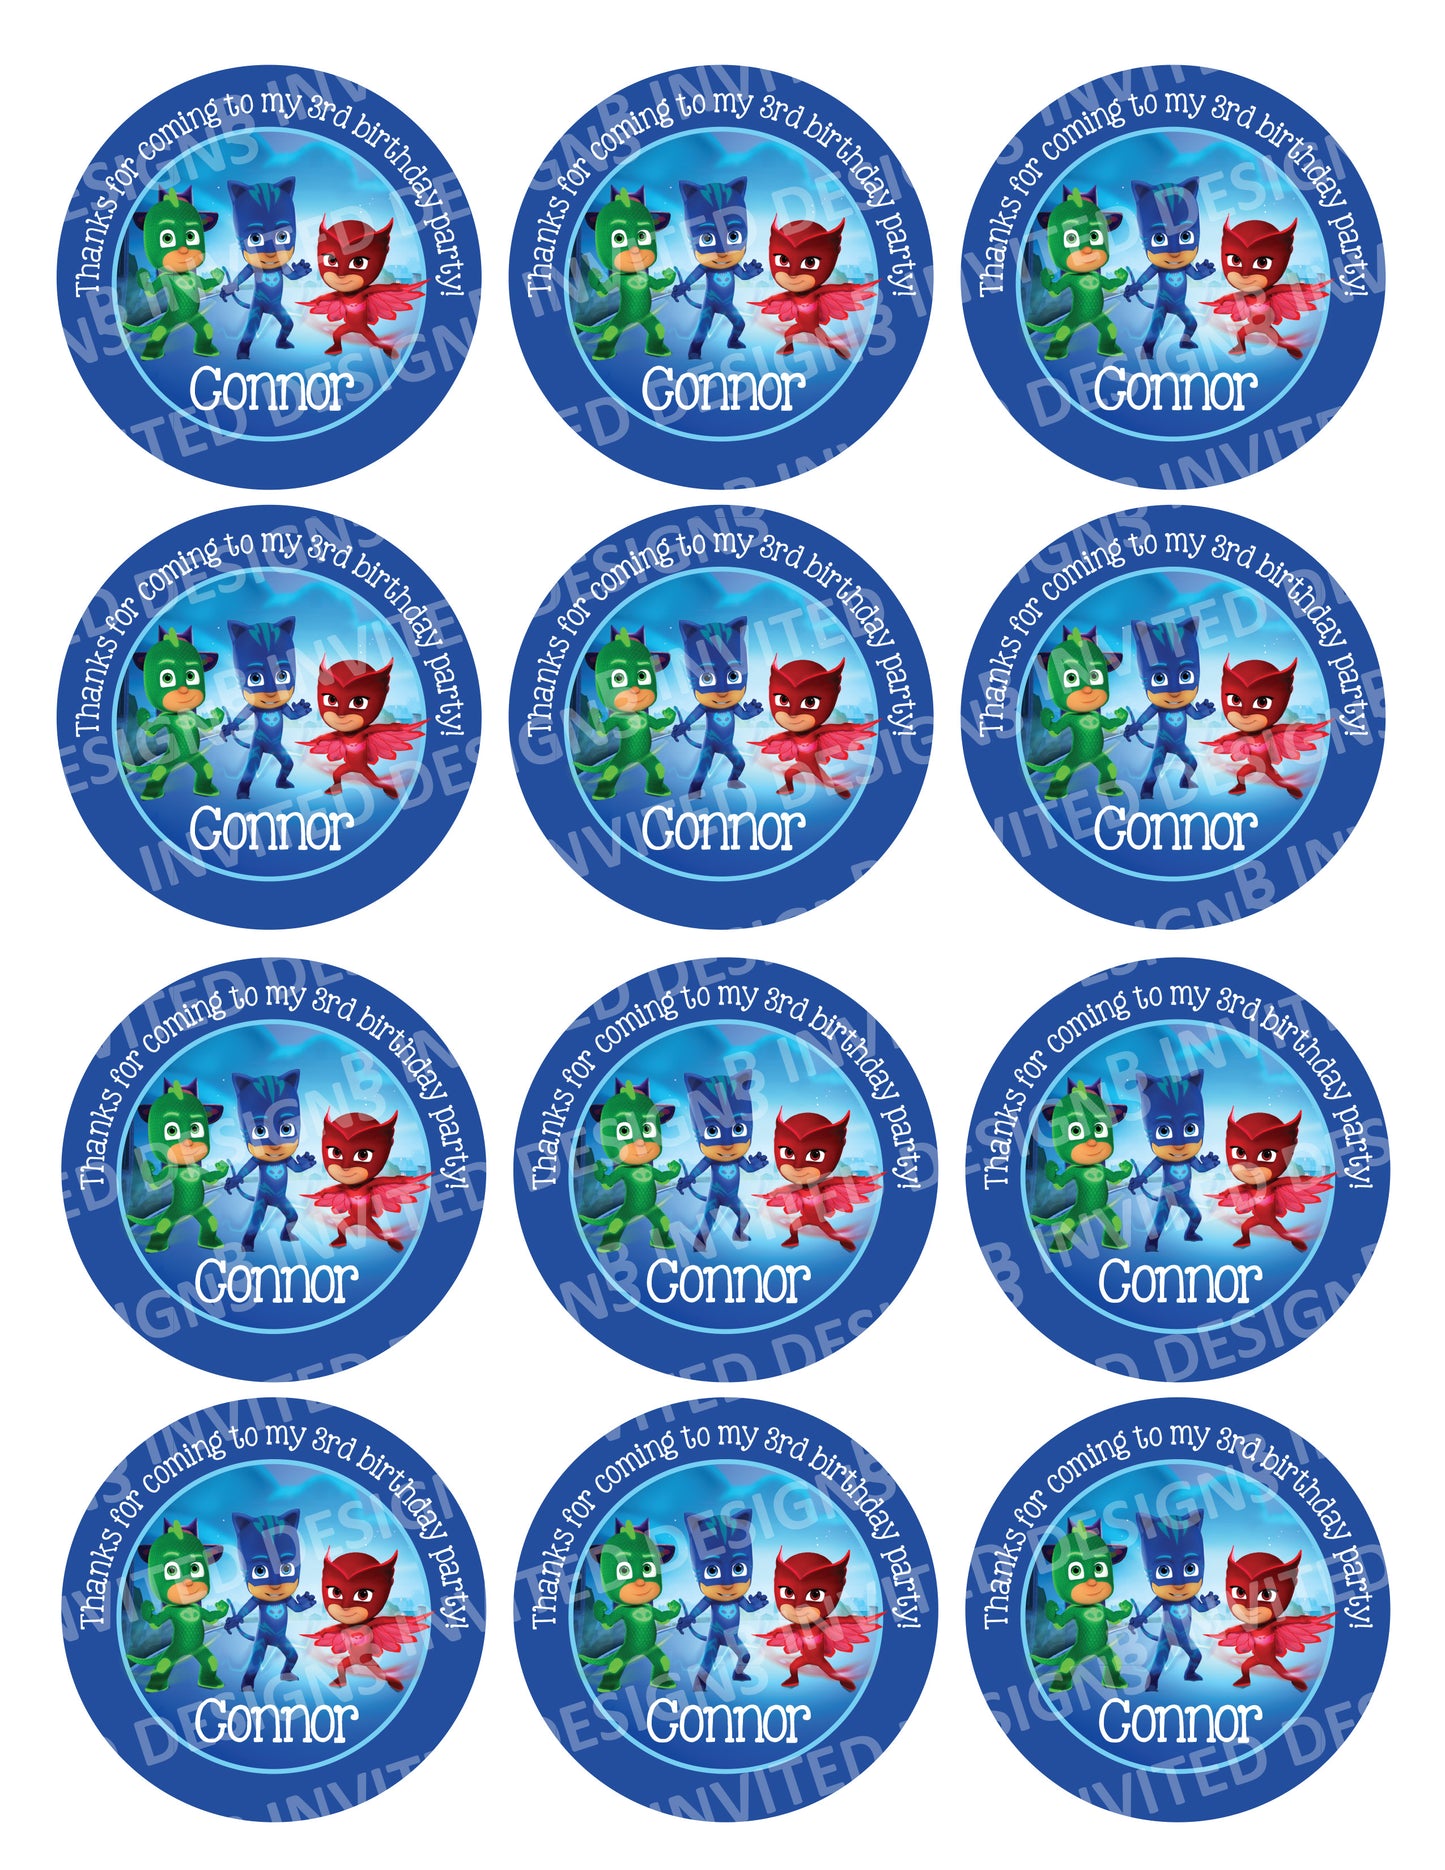 PJ MASKS Personalized Stickers for Gift Bags, Party Favors! Printed or Digital!